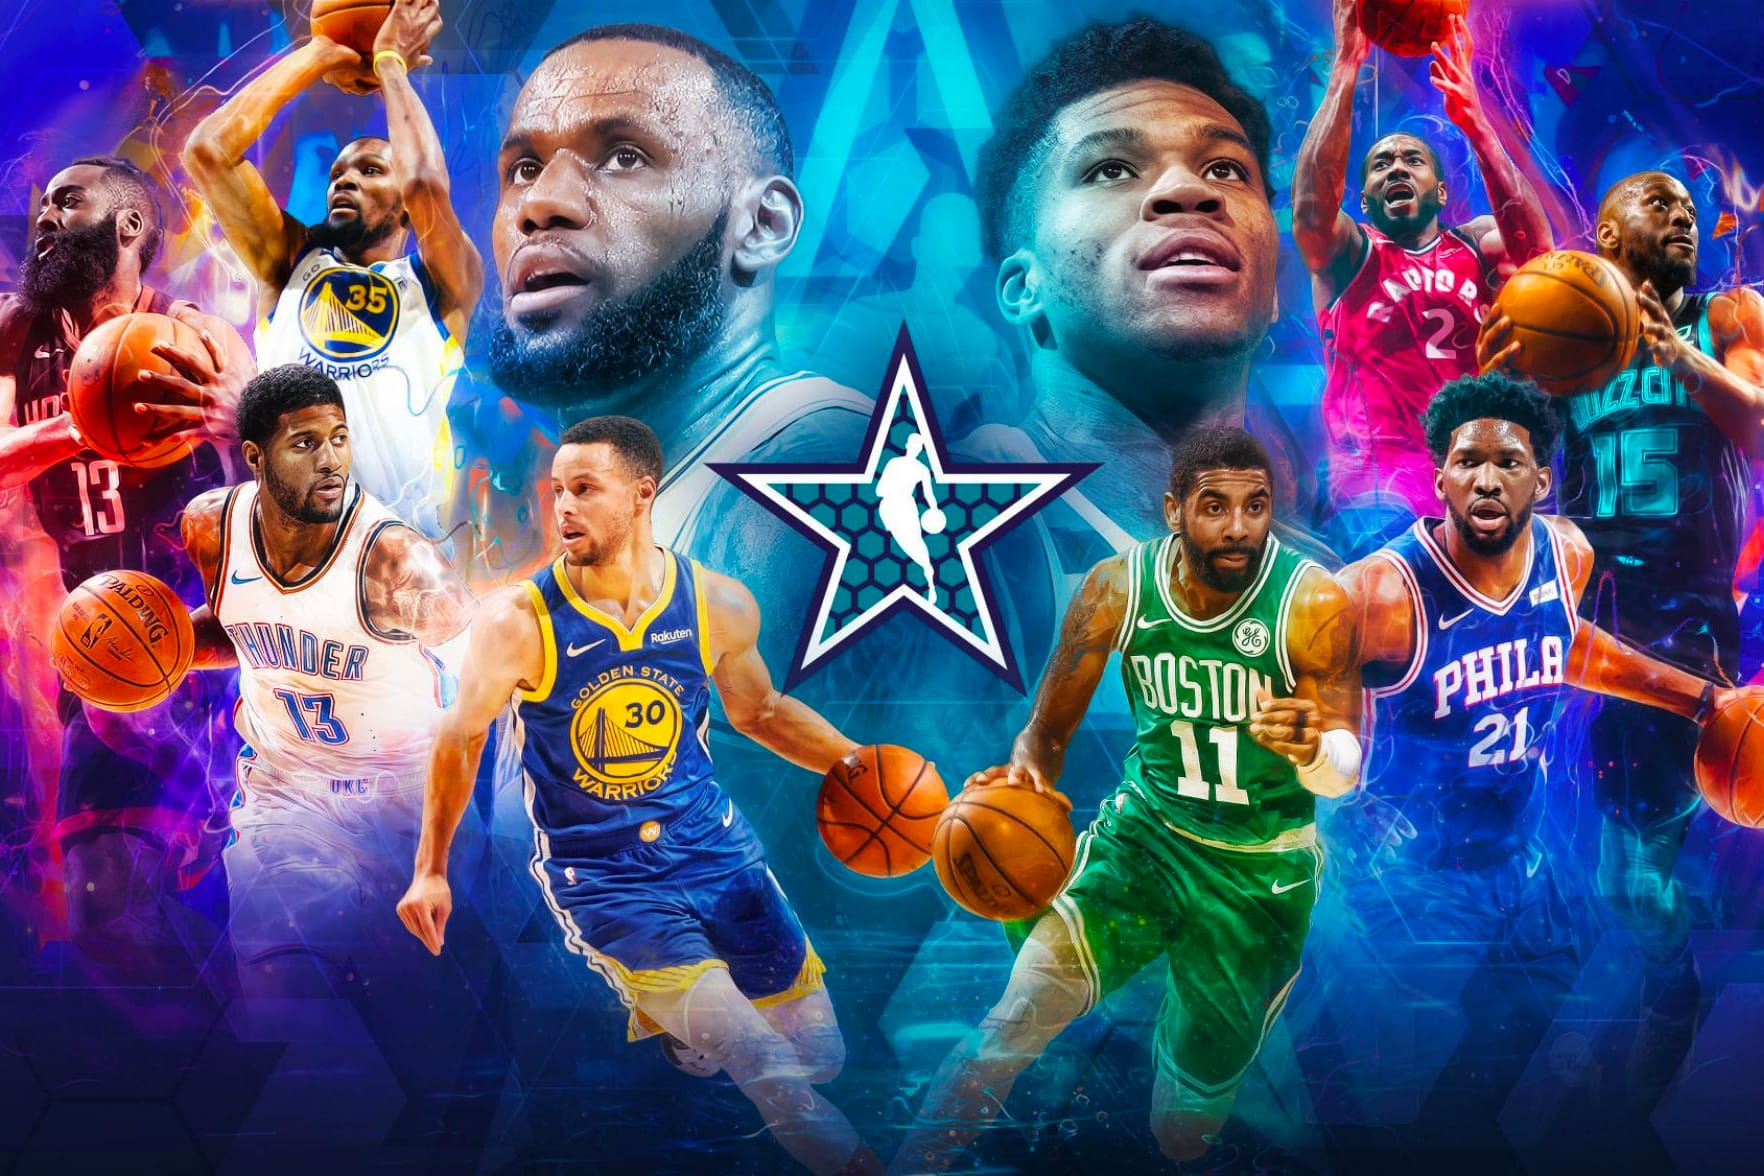 nba all star game tickets 2019